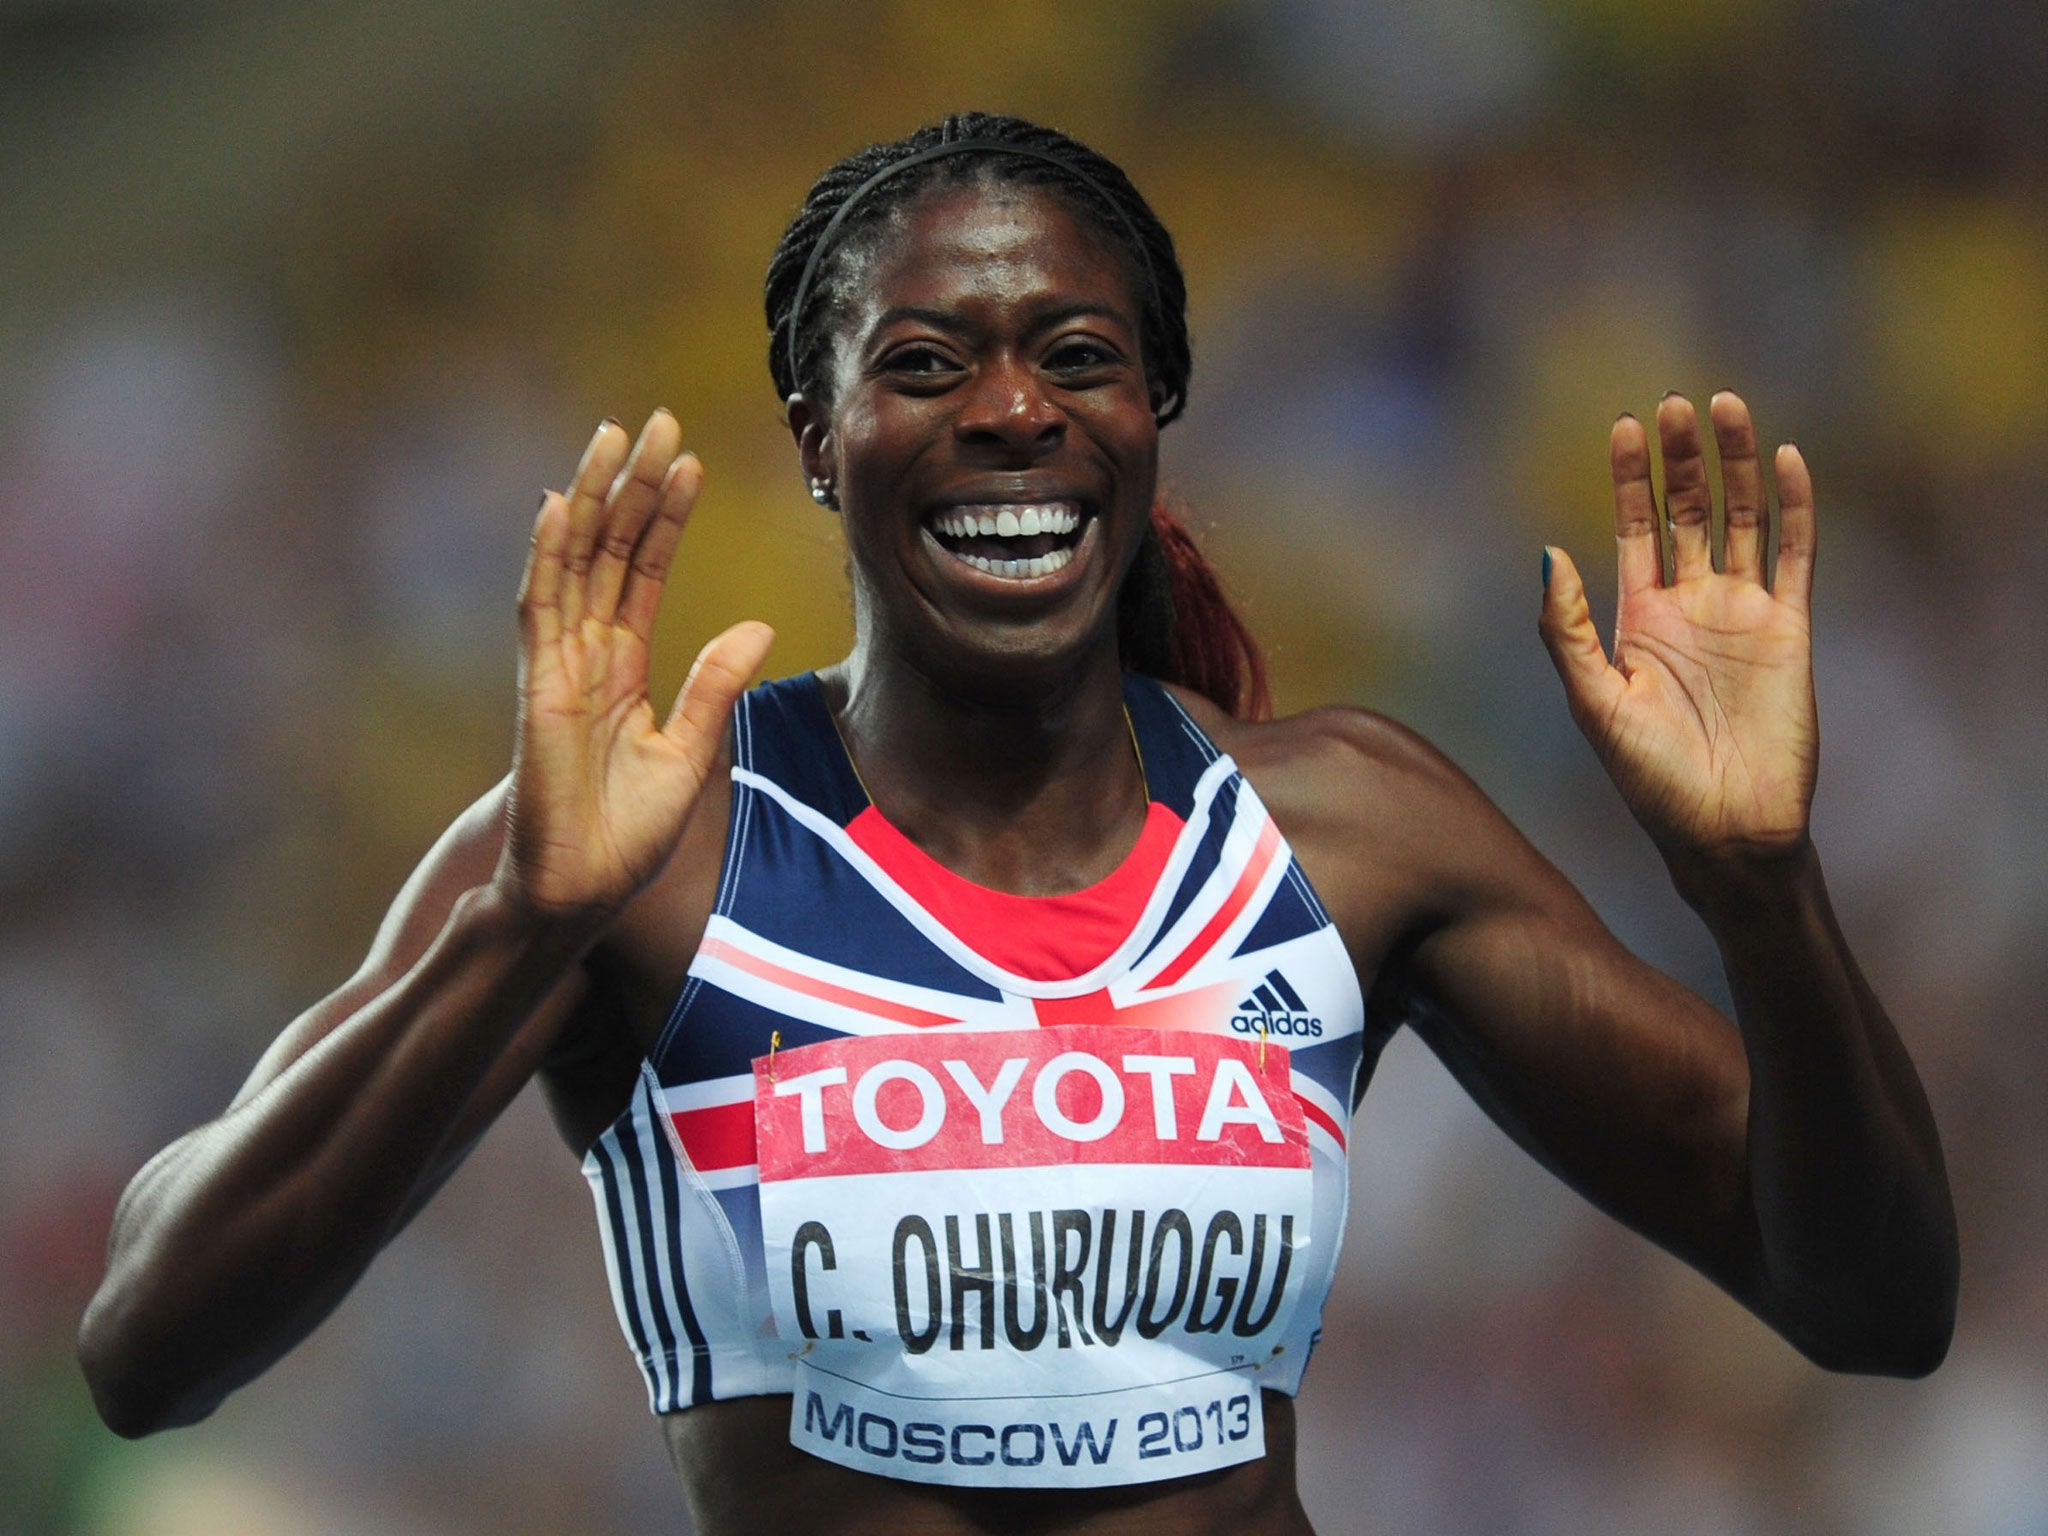 Christine Ohuruogu reacts after her 400m victory is confirmed after the narrowest of margins